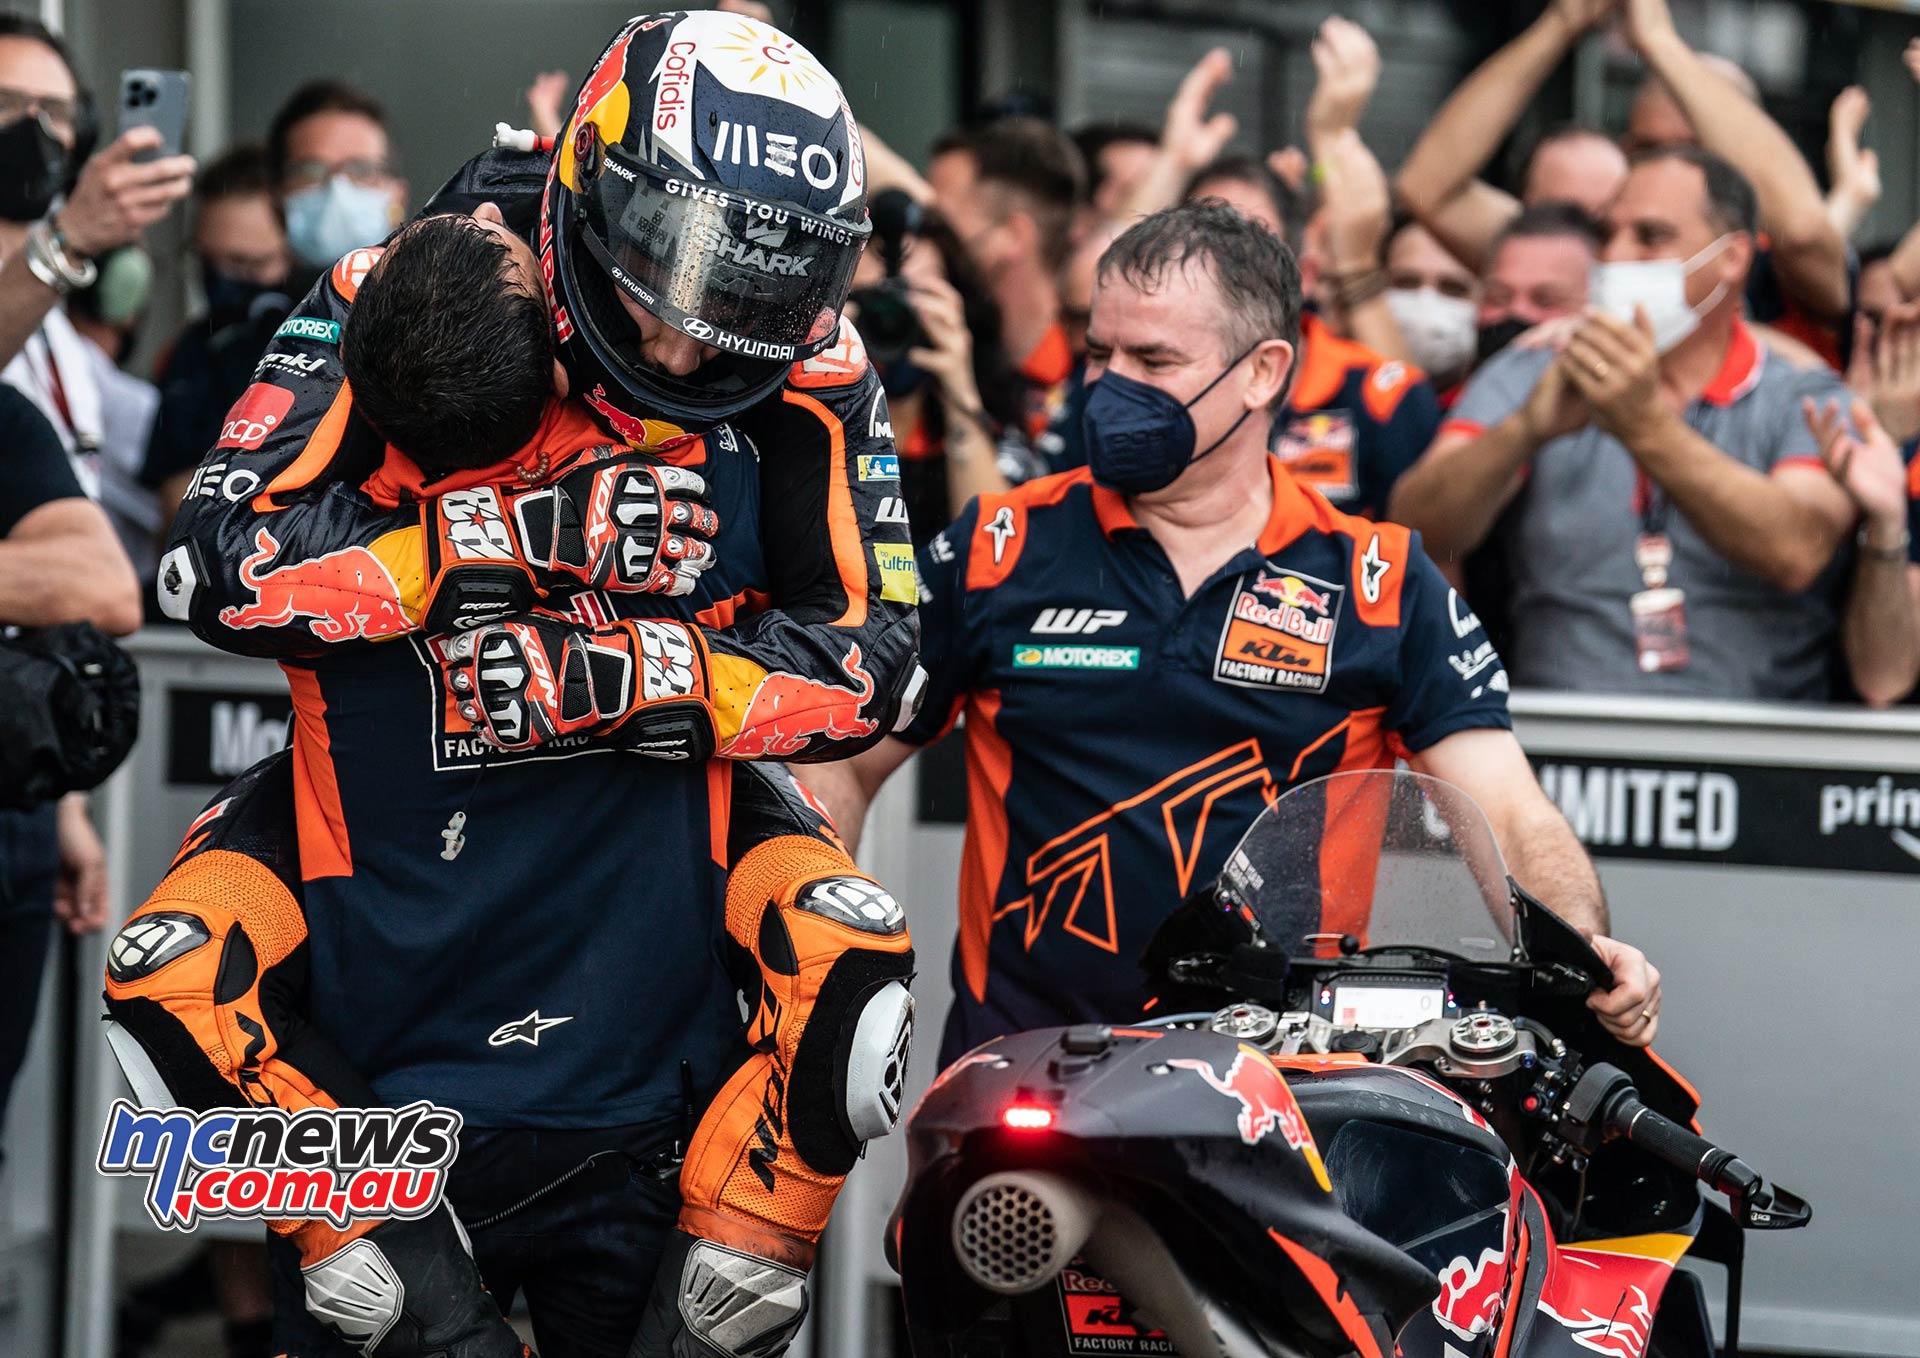 2022 MotoGP™: The search for perfection starts here